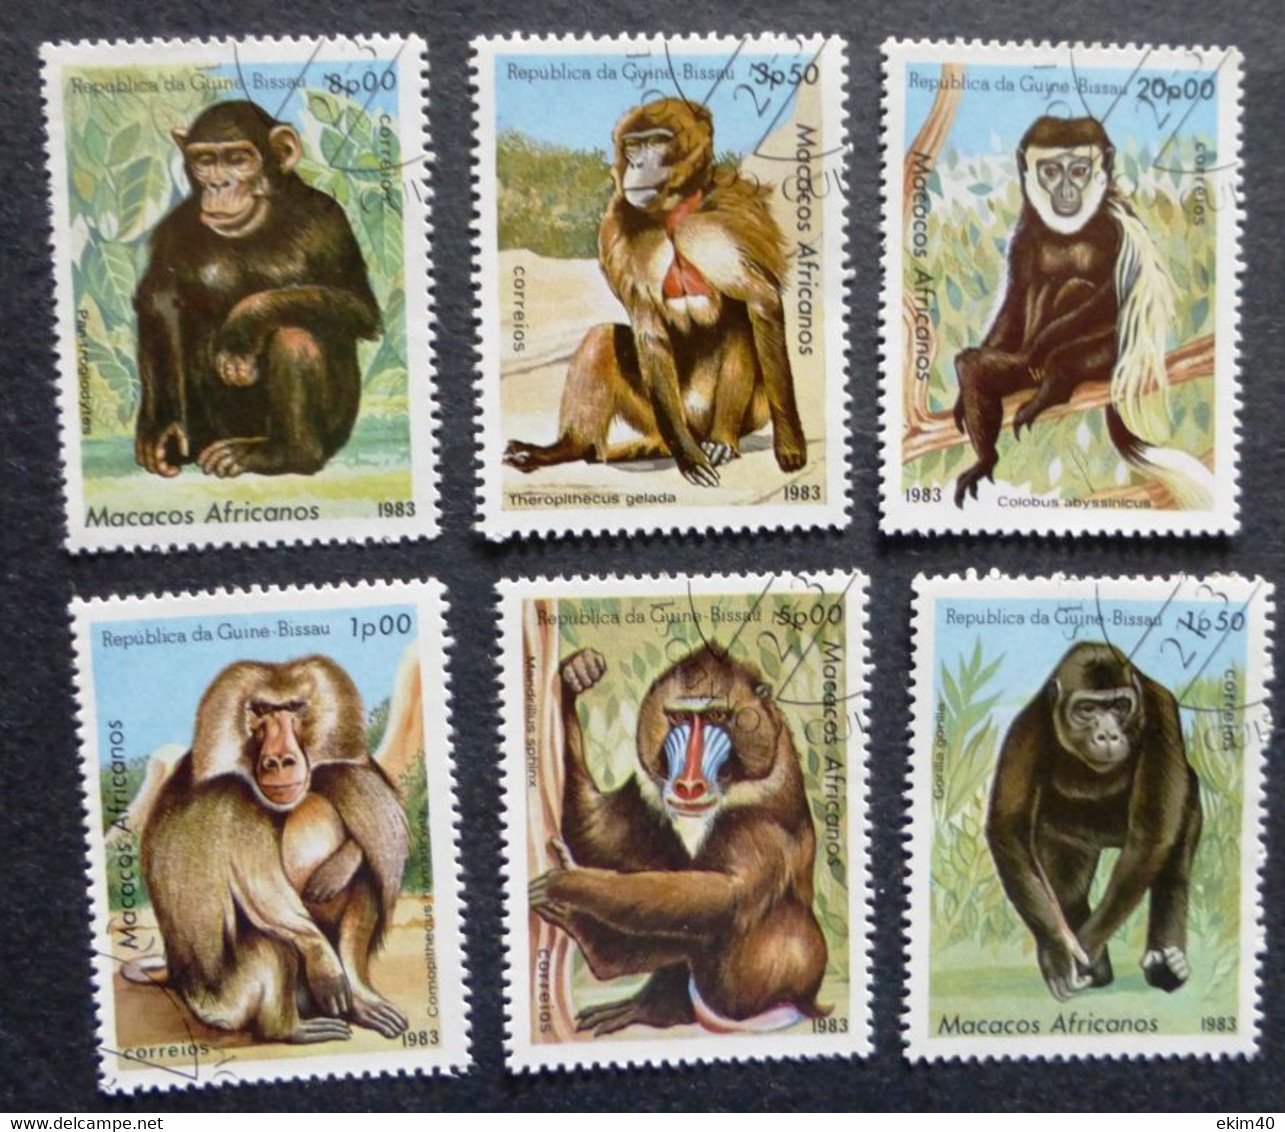 Selection Of Used/Cancelled Stamps From Guinne Bissau Wild Animals. No DC-376 - Usati